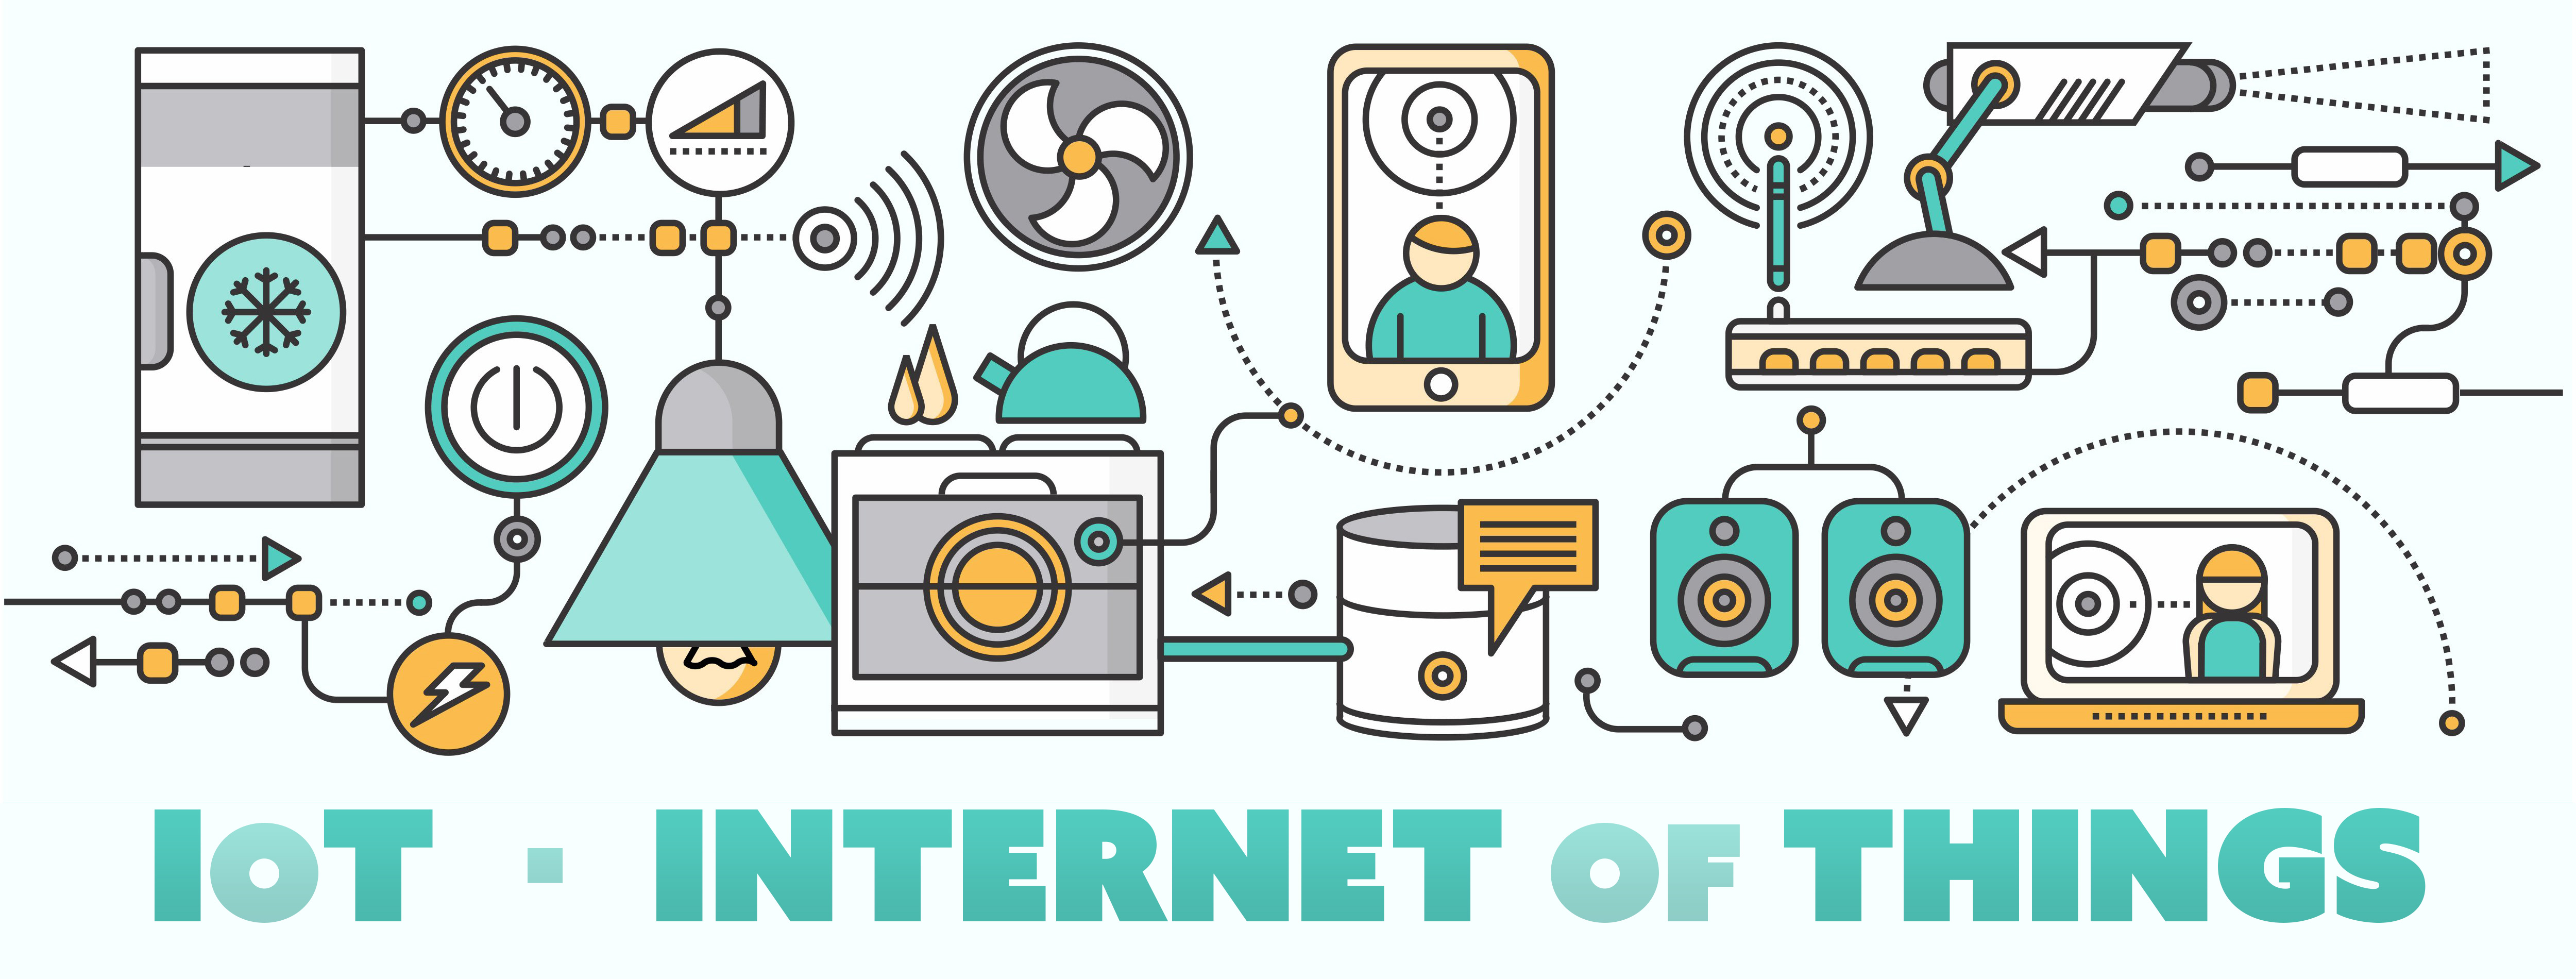 The Internet of Things (IoT) is one of the hottest terms in the technology industry today. Hardly a week goes by without hearing about our connected world, or the Internet…